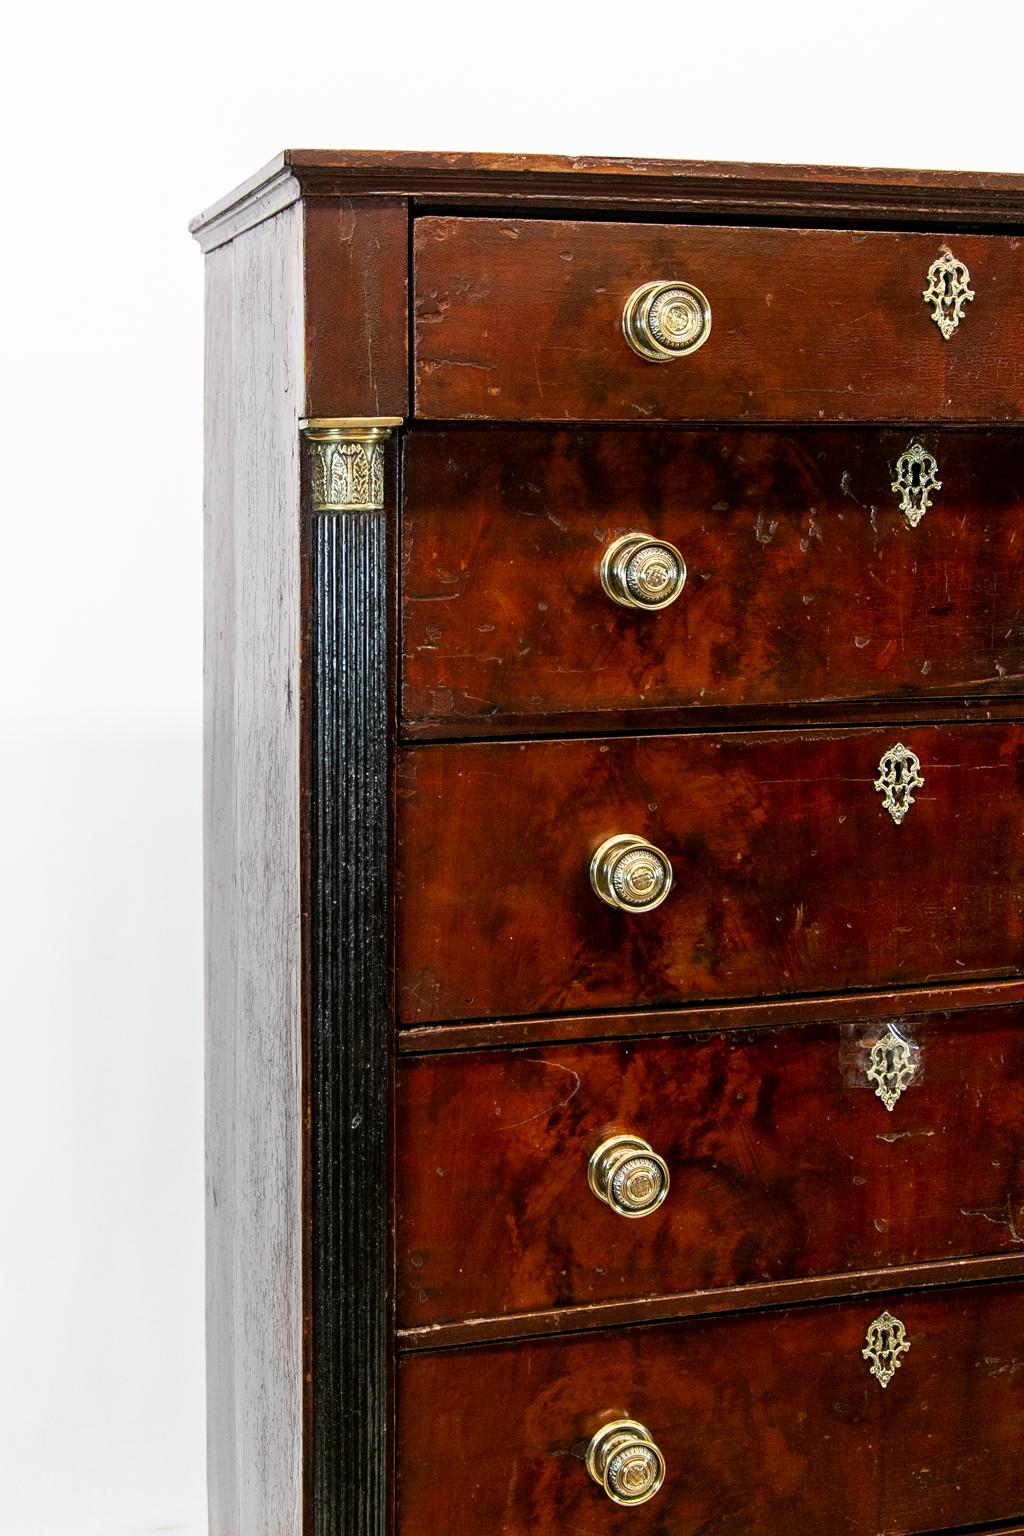 Faux painted six-drawer chest is painted to simulate croch mahogany. The stiles have fluted palisters with brass capitals and bases terminating in tapered feet. The brass knobs and escutcheons are correct for the period but are not original.